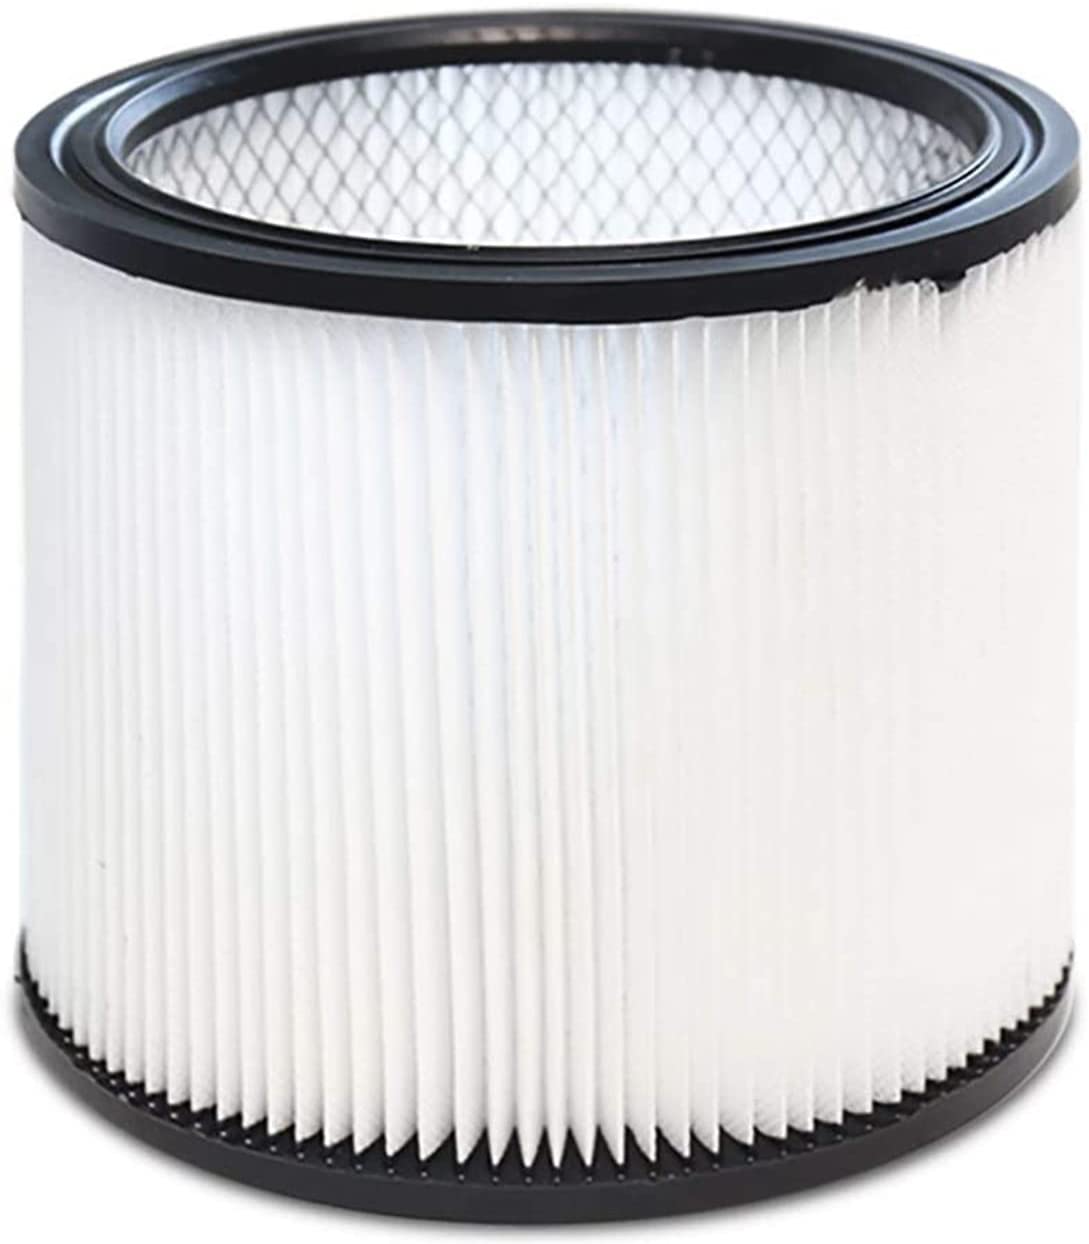 Filter Cartridge For Shop Vac Wet Dry Replace 90304 9030400 903-04-00 903 E 